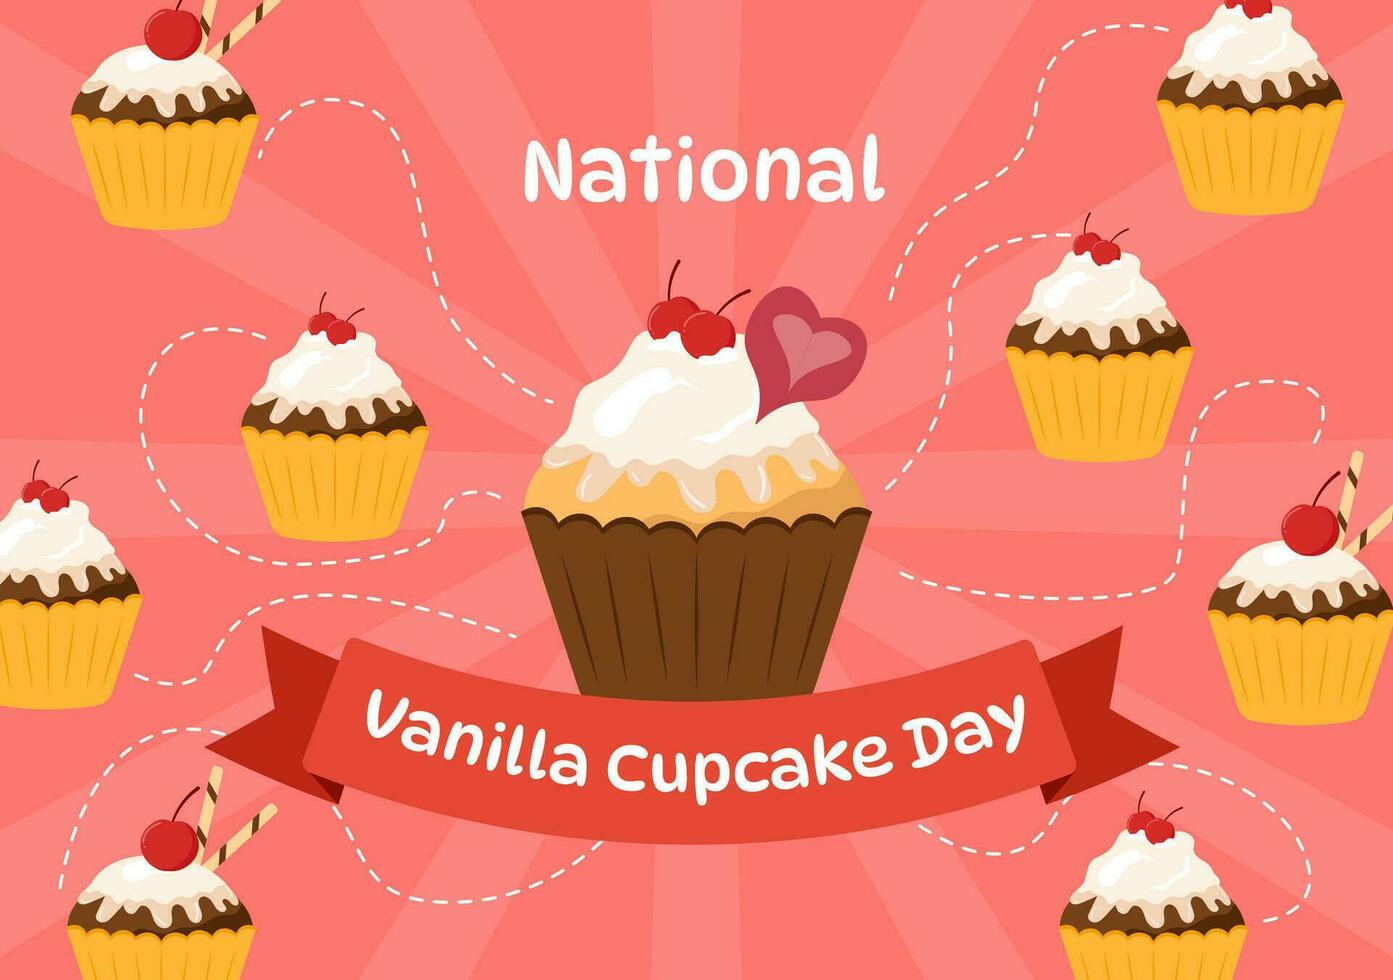 National Vanilla Cupcake Day Vector Illustration on 10 November of Cupcakes with Strawberry and Vanilla Cream in Flat Cartoon Pink Background Design